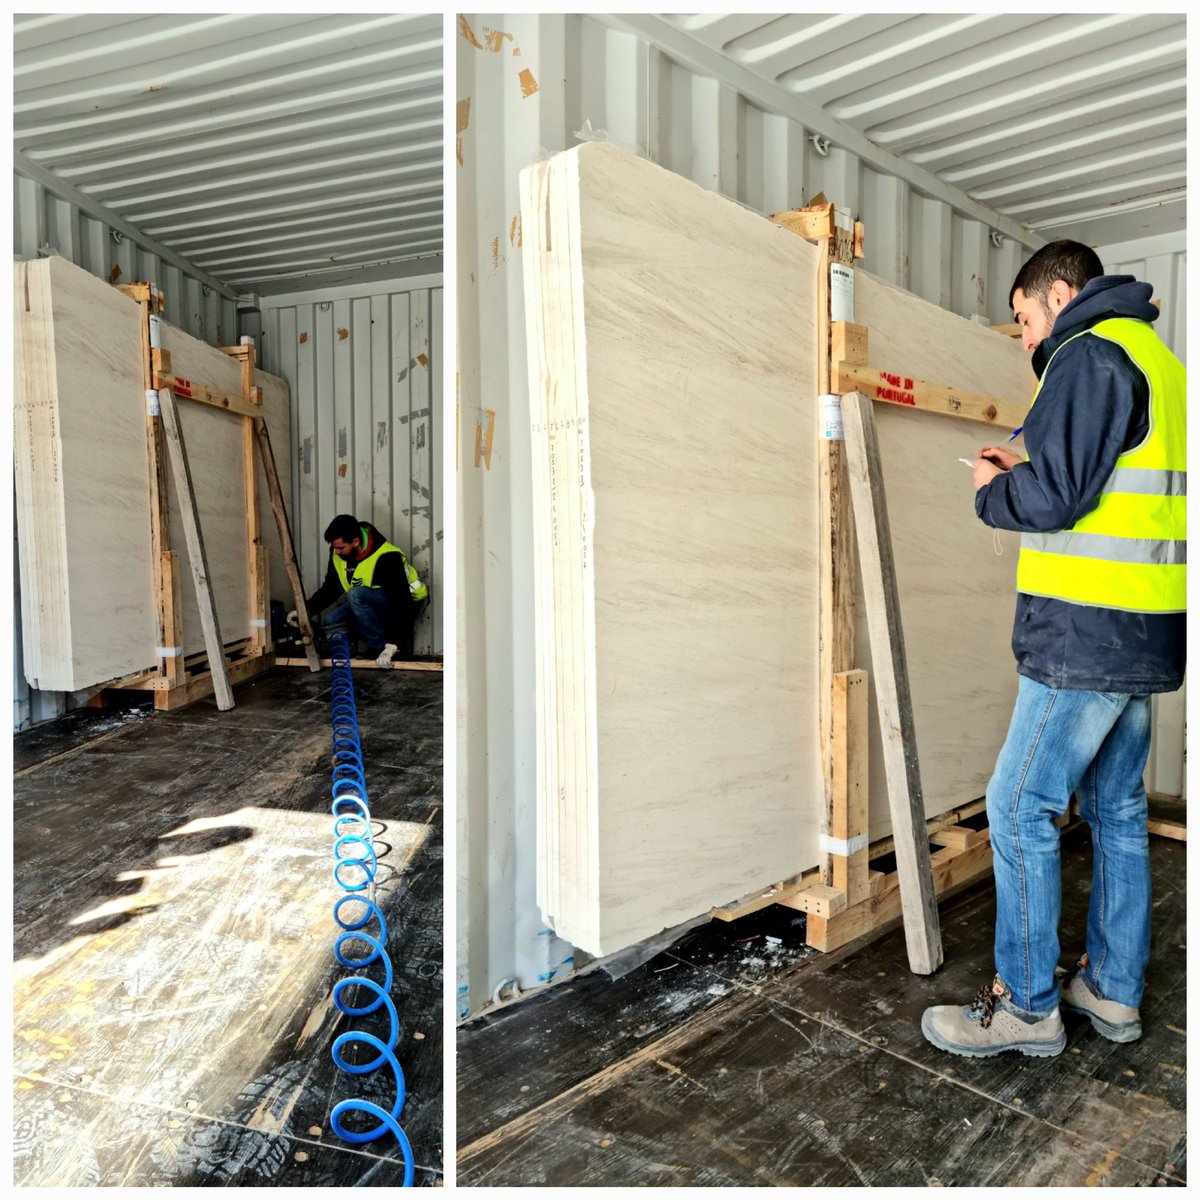 Container loading, final stage in the process of preparing the customer's order ✅️
#Container #containerloading